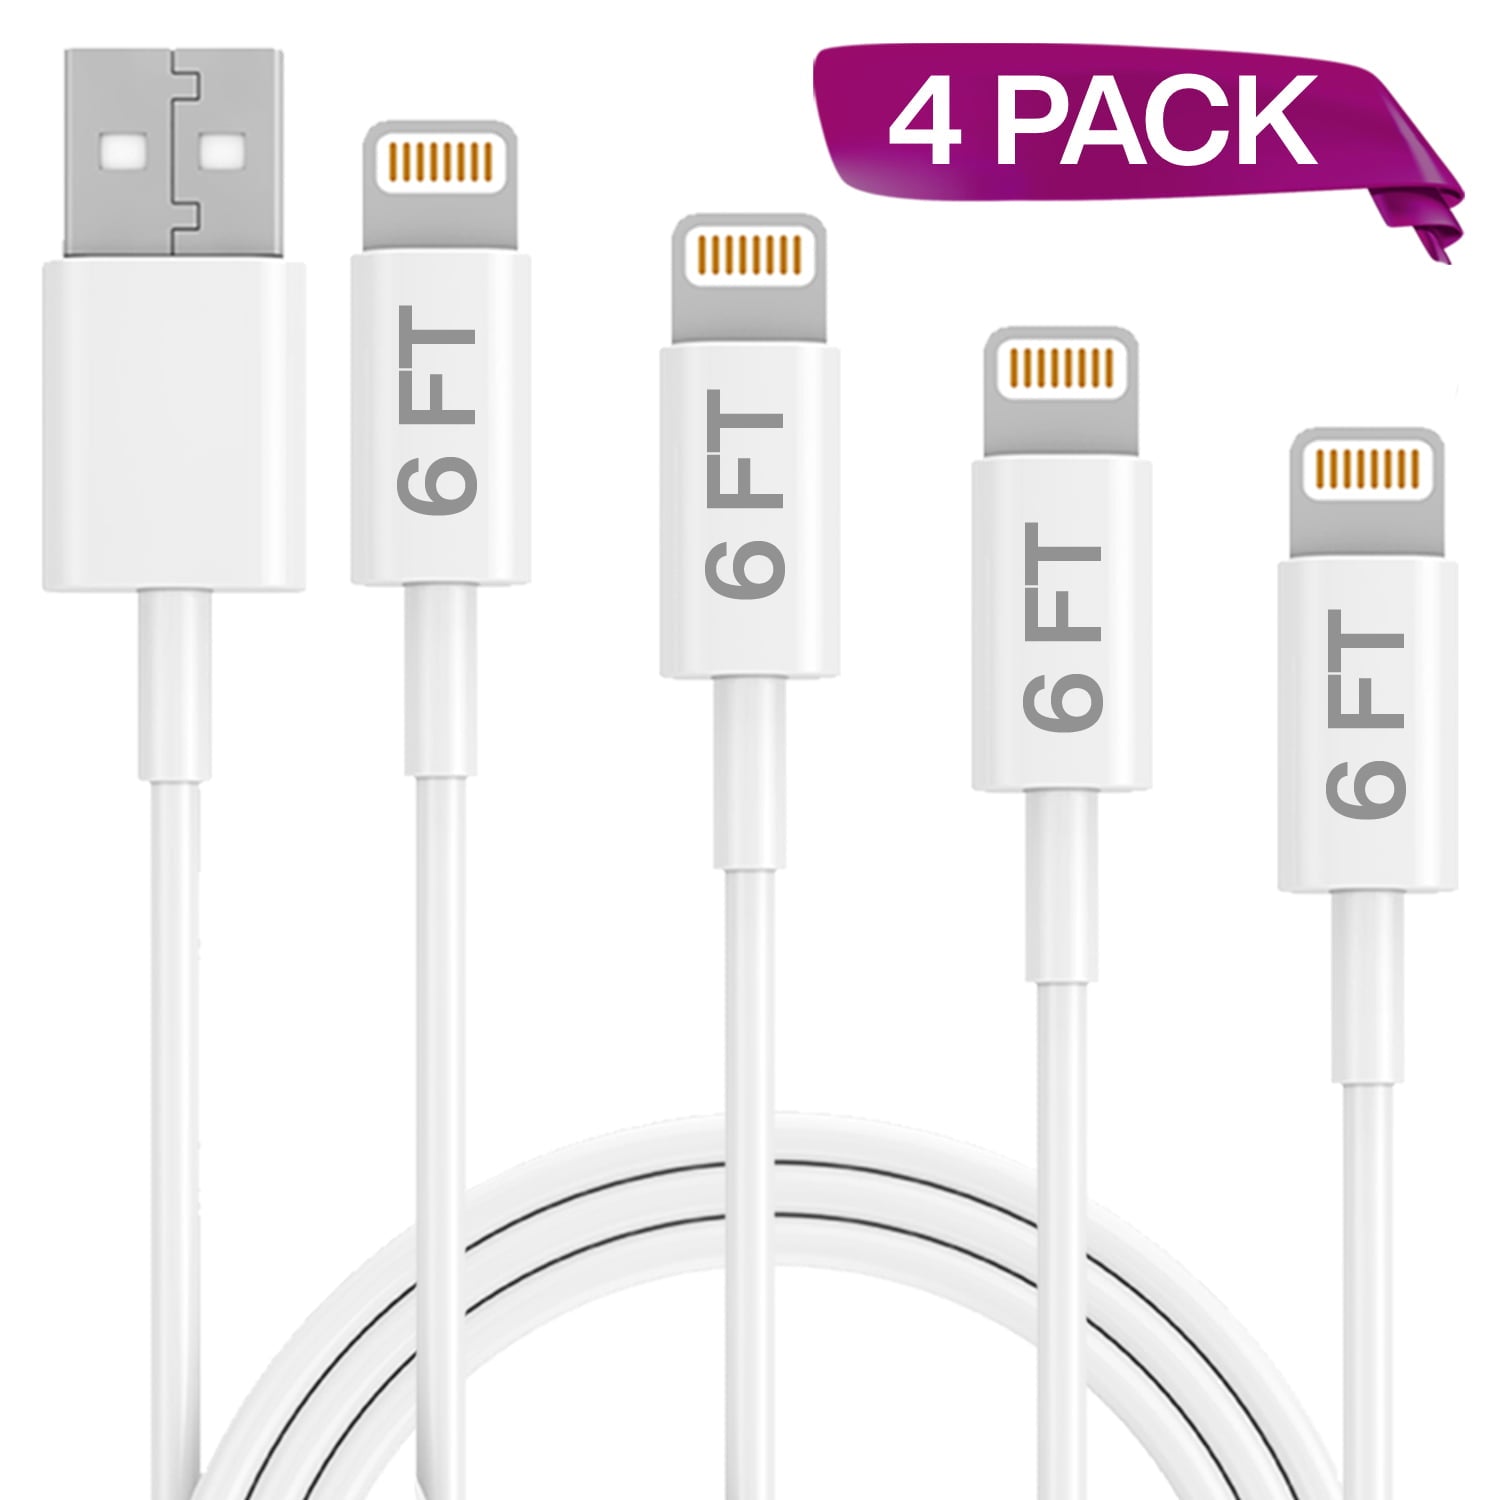 Ixir Charger Lightning Cable, 4 Pack 6FT USB Cable, Compatible with iPhone Fast Charging Cord